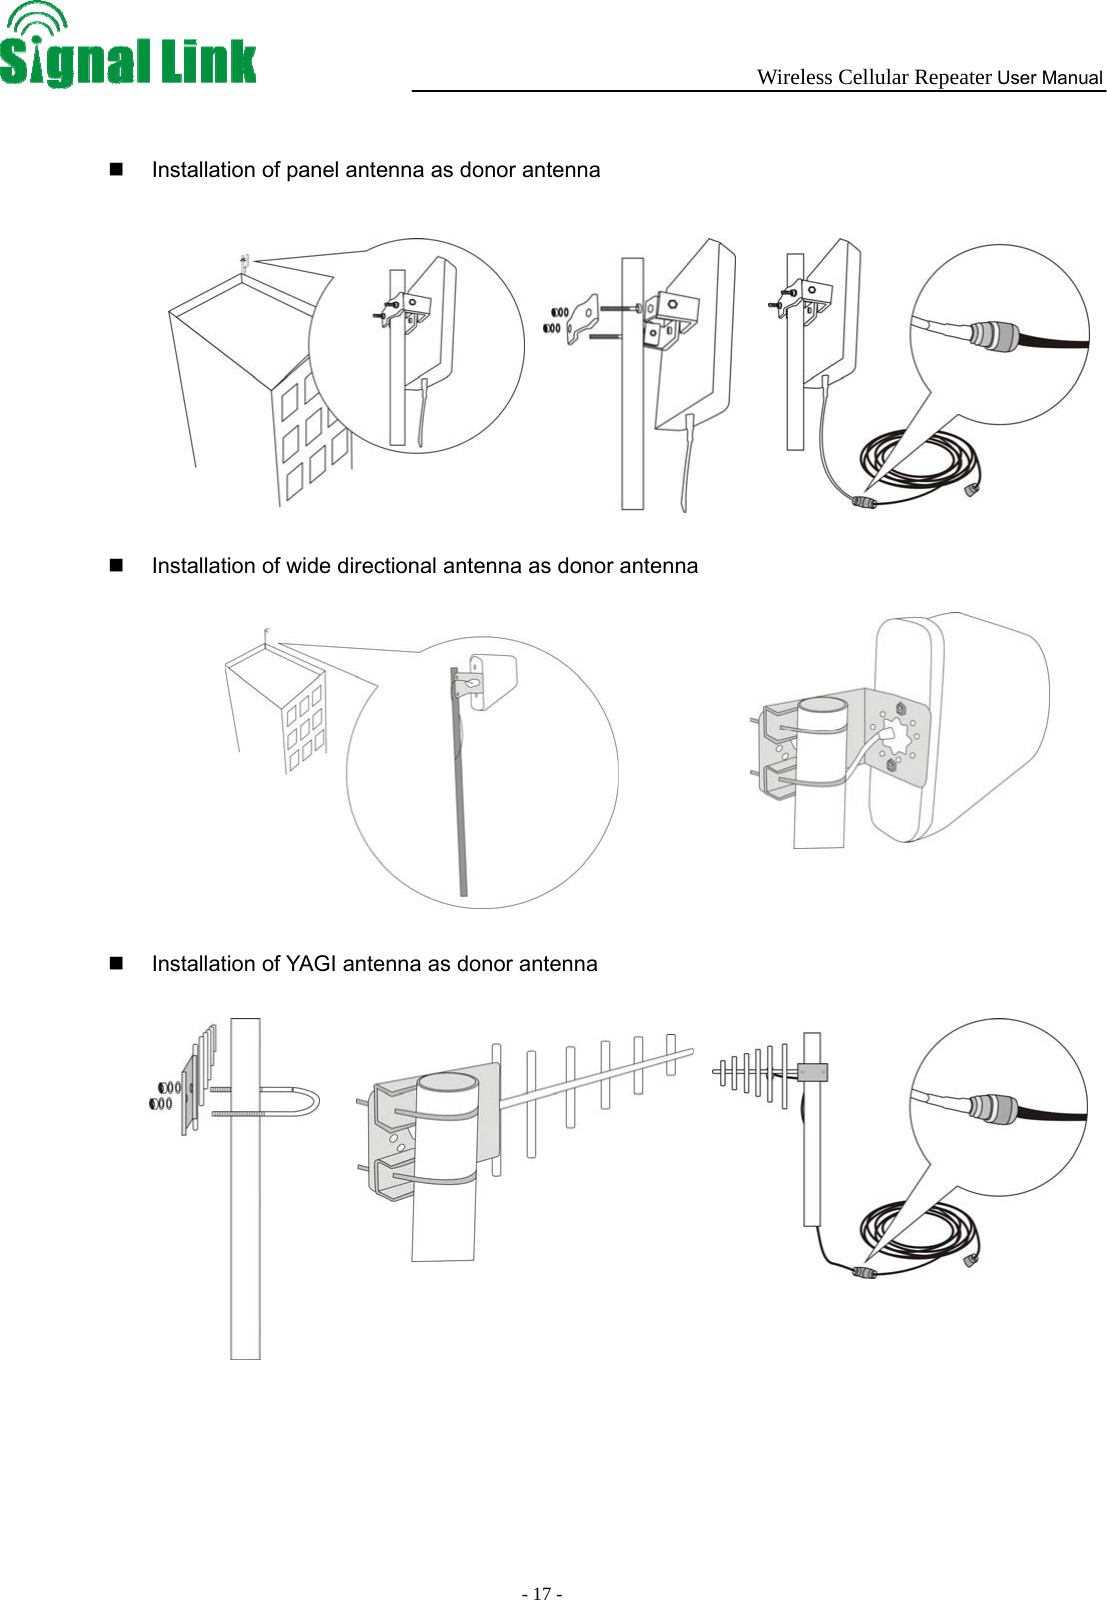  Wireless Cellular Repeater User Manual  - 17 -      Installation of panel antenna as donor antenna                Installation of wide directional antenna as donor antenna              Installation of YAGI antenna as donor antenna             